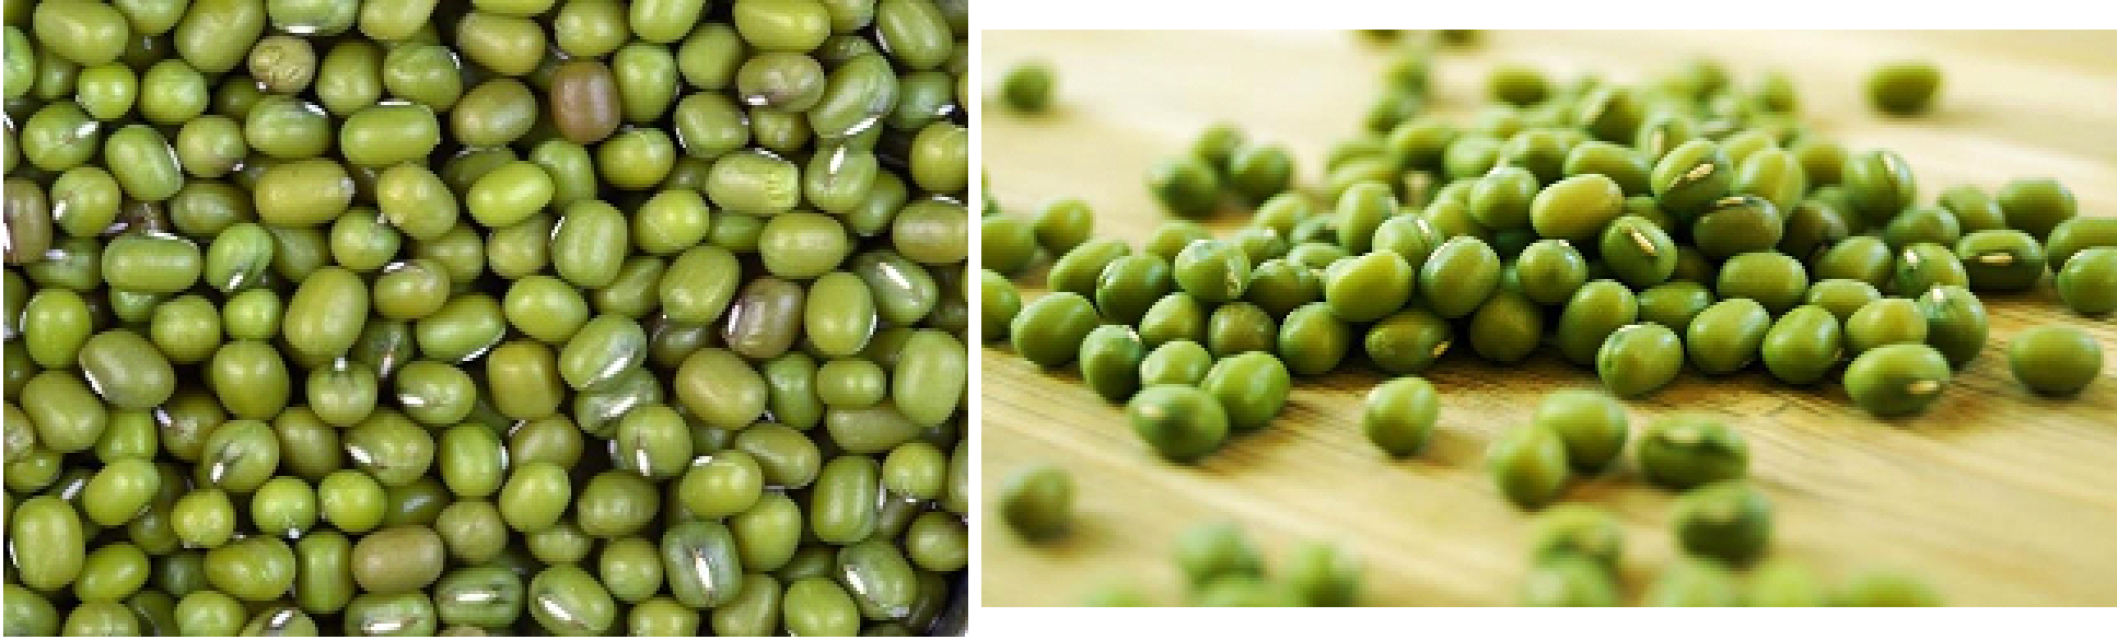 Premium Green Mung Beans - Quality Agro & Agriculture Supply